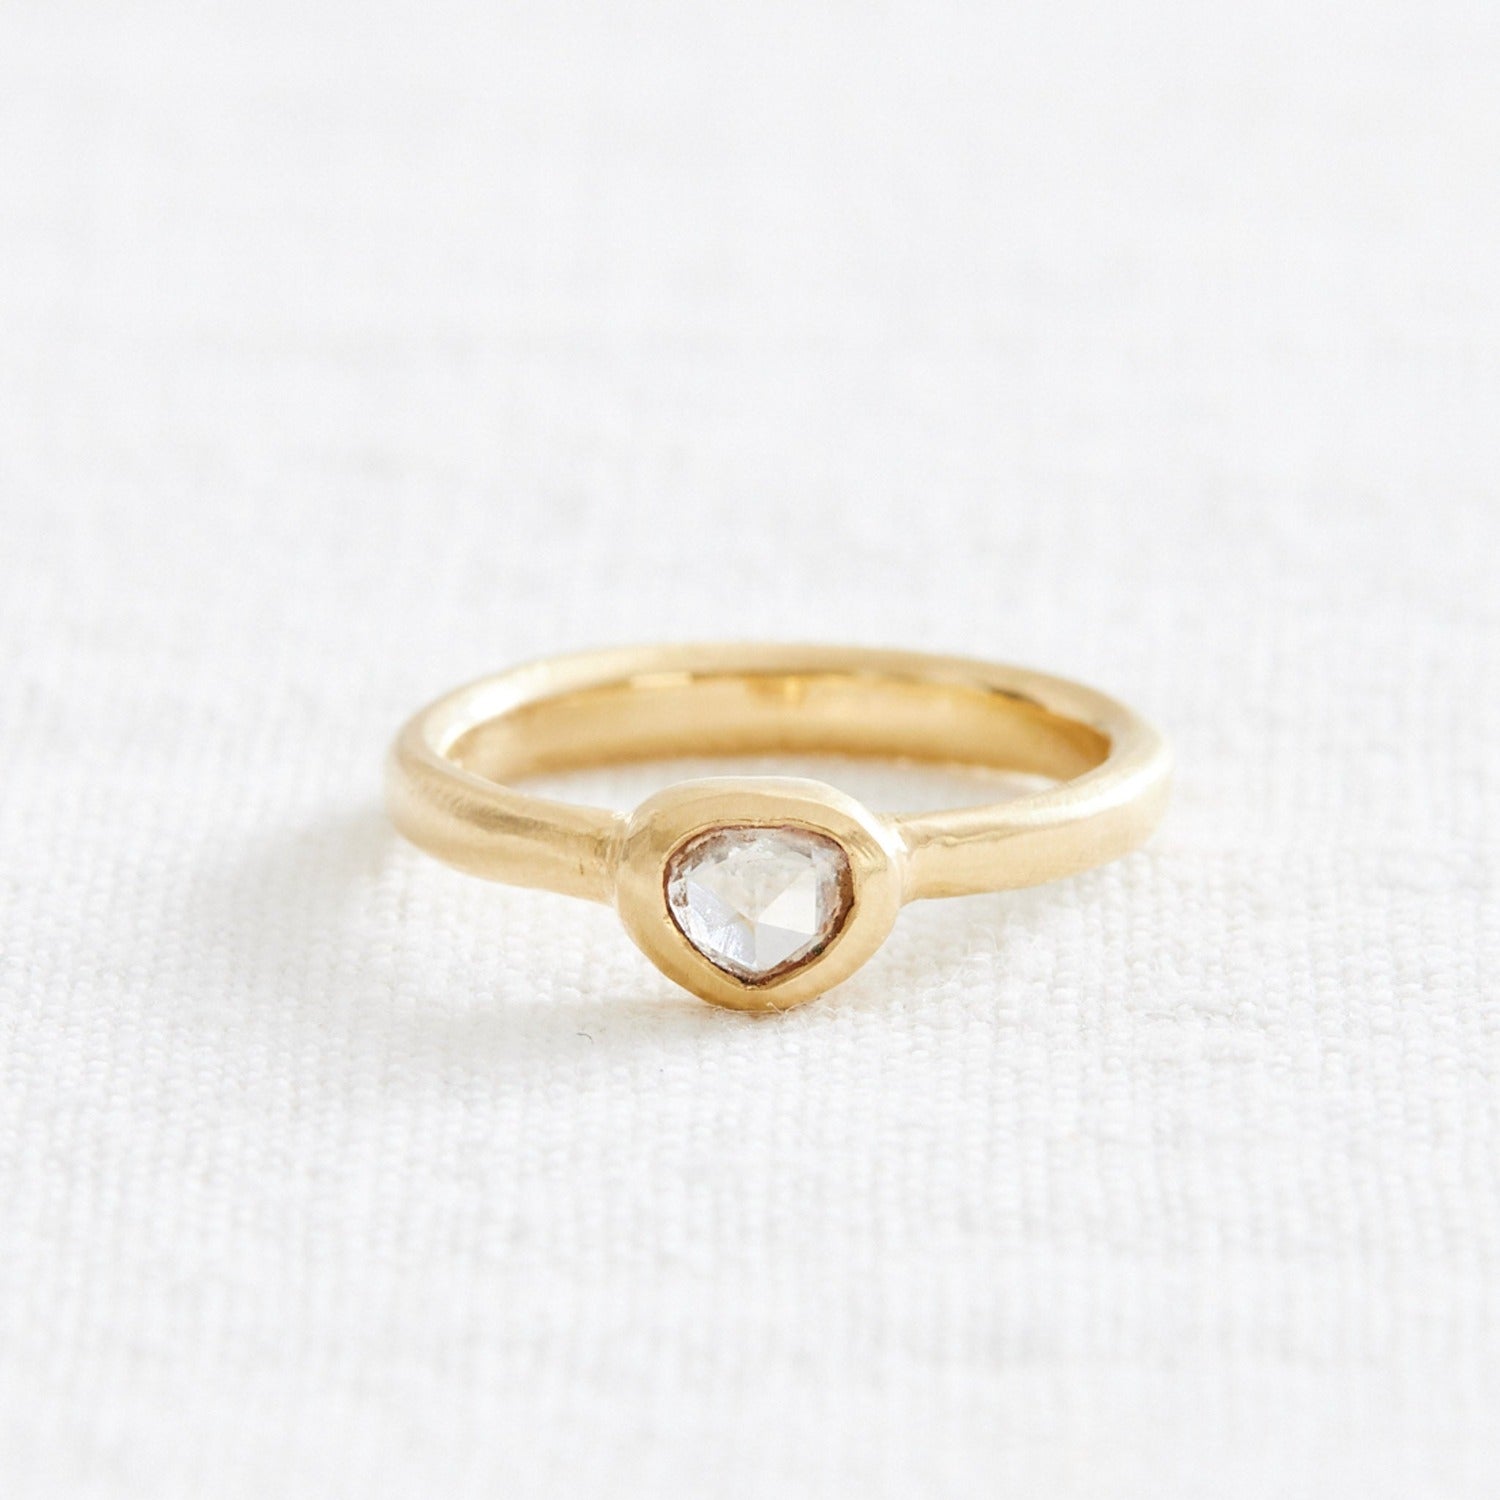 gold ring with organically shaped diamond 